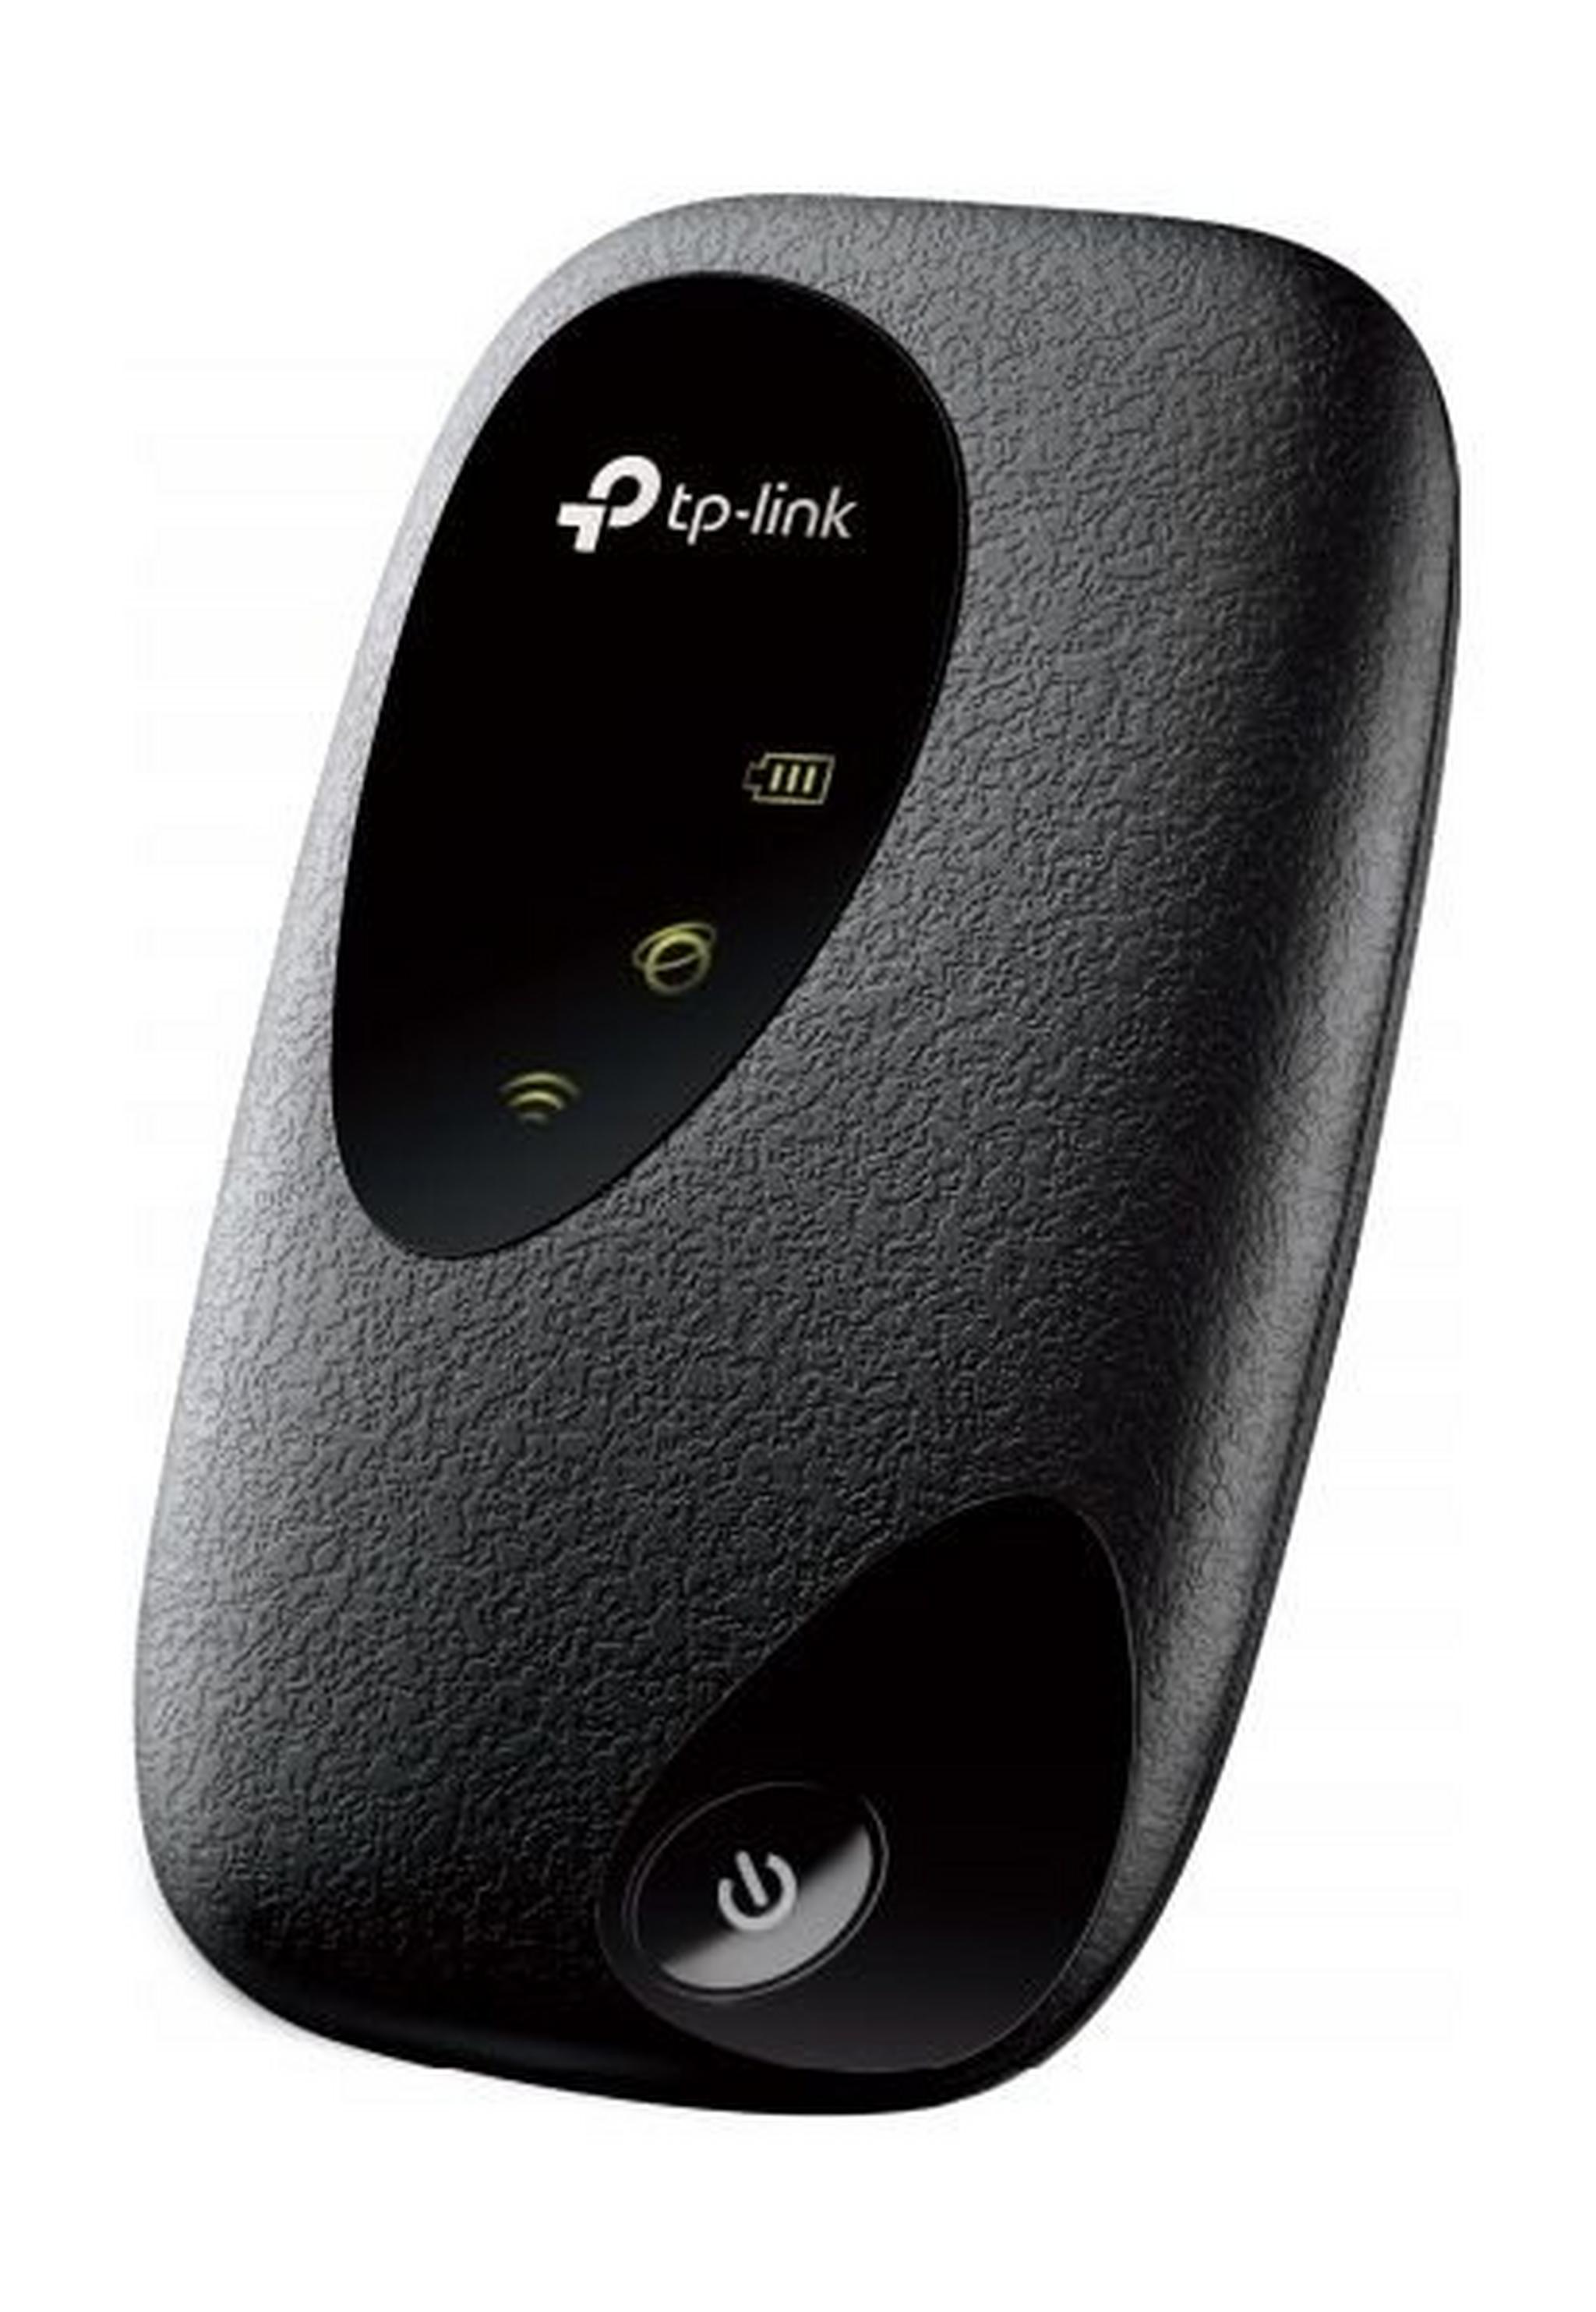 TP Link 4G LTE Mobile Router - M7200